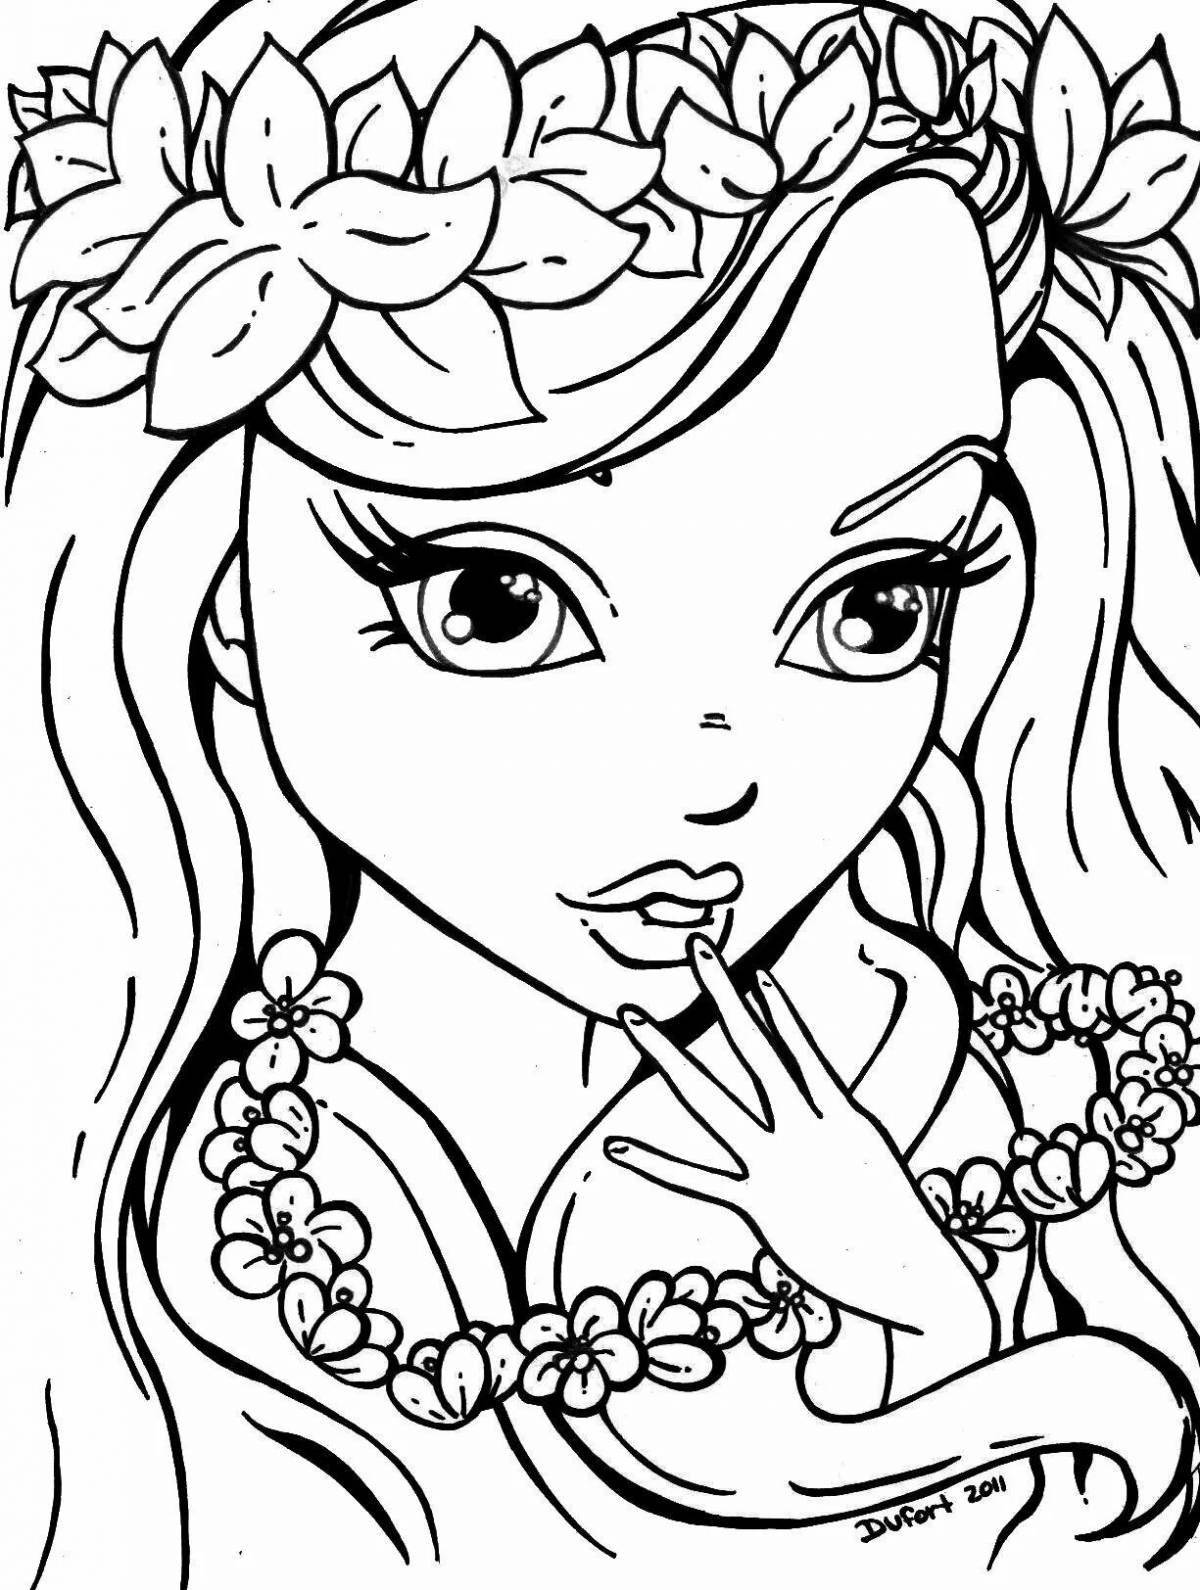 Colorful coloring pages by themselves